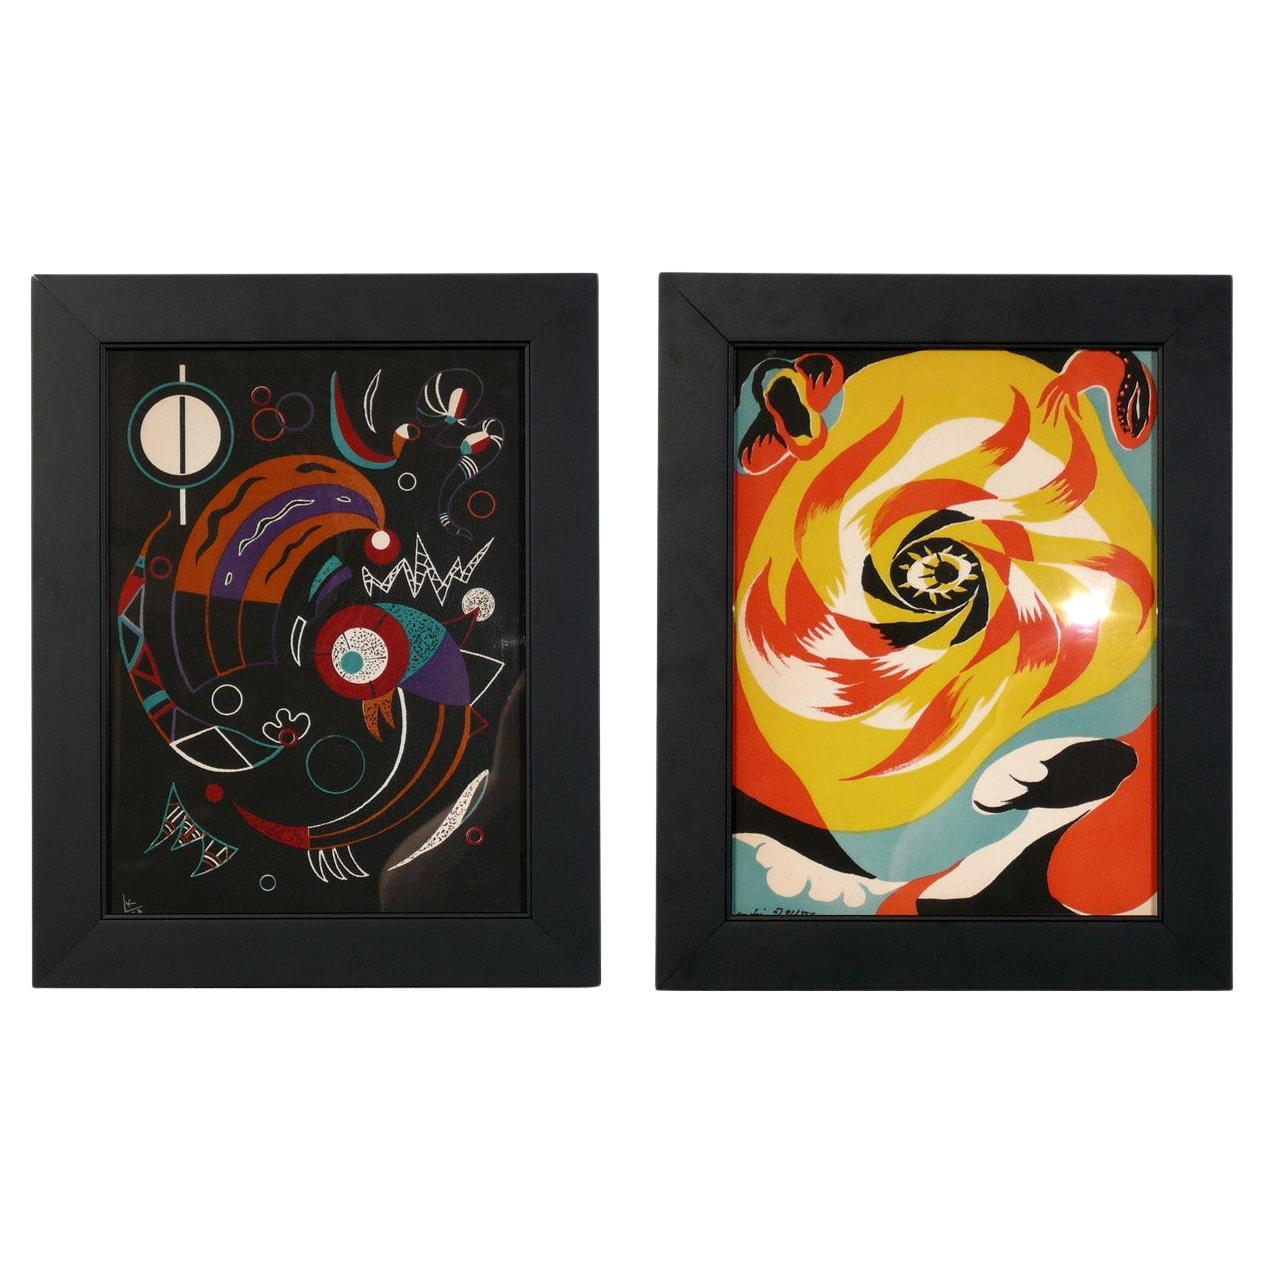 Surrealist Lithographs by Wassily Kandinsky and Andre Masson, circa 1938